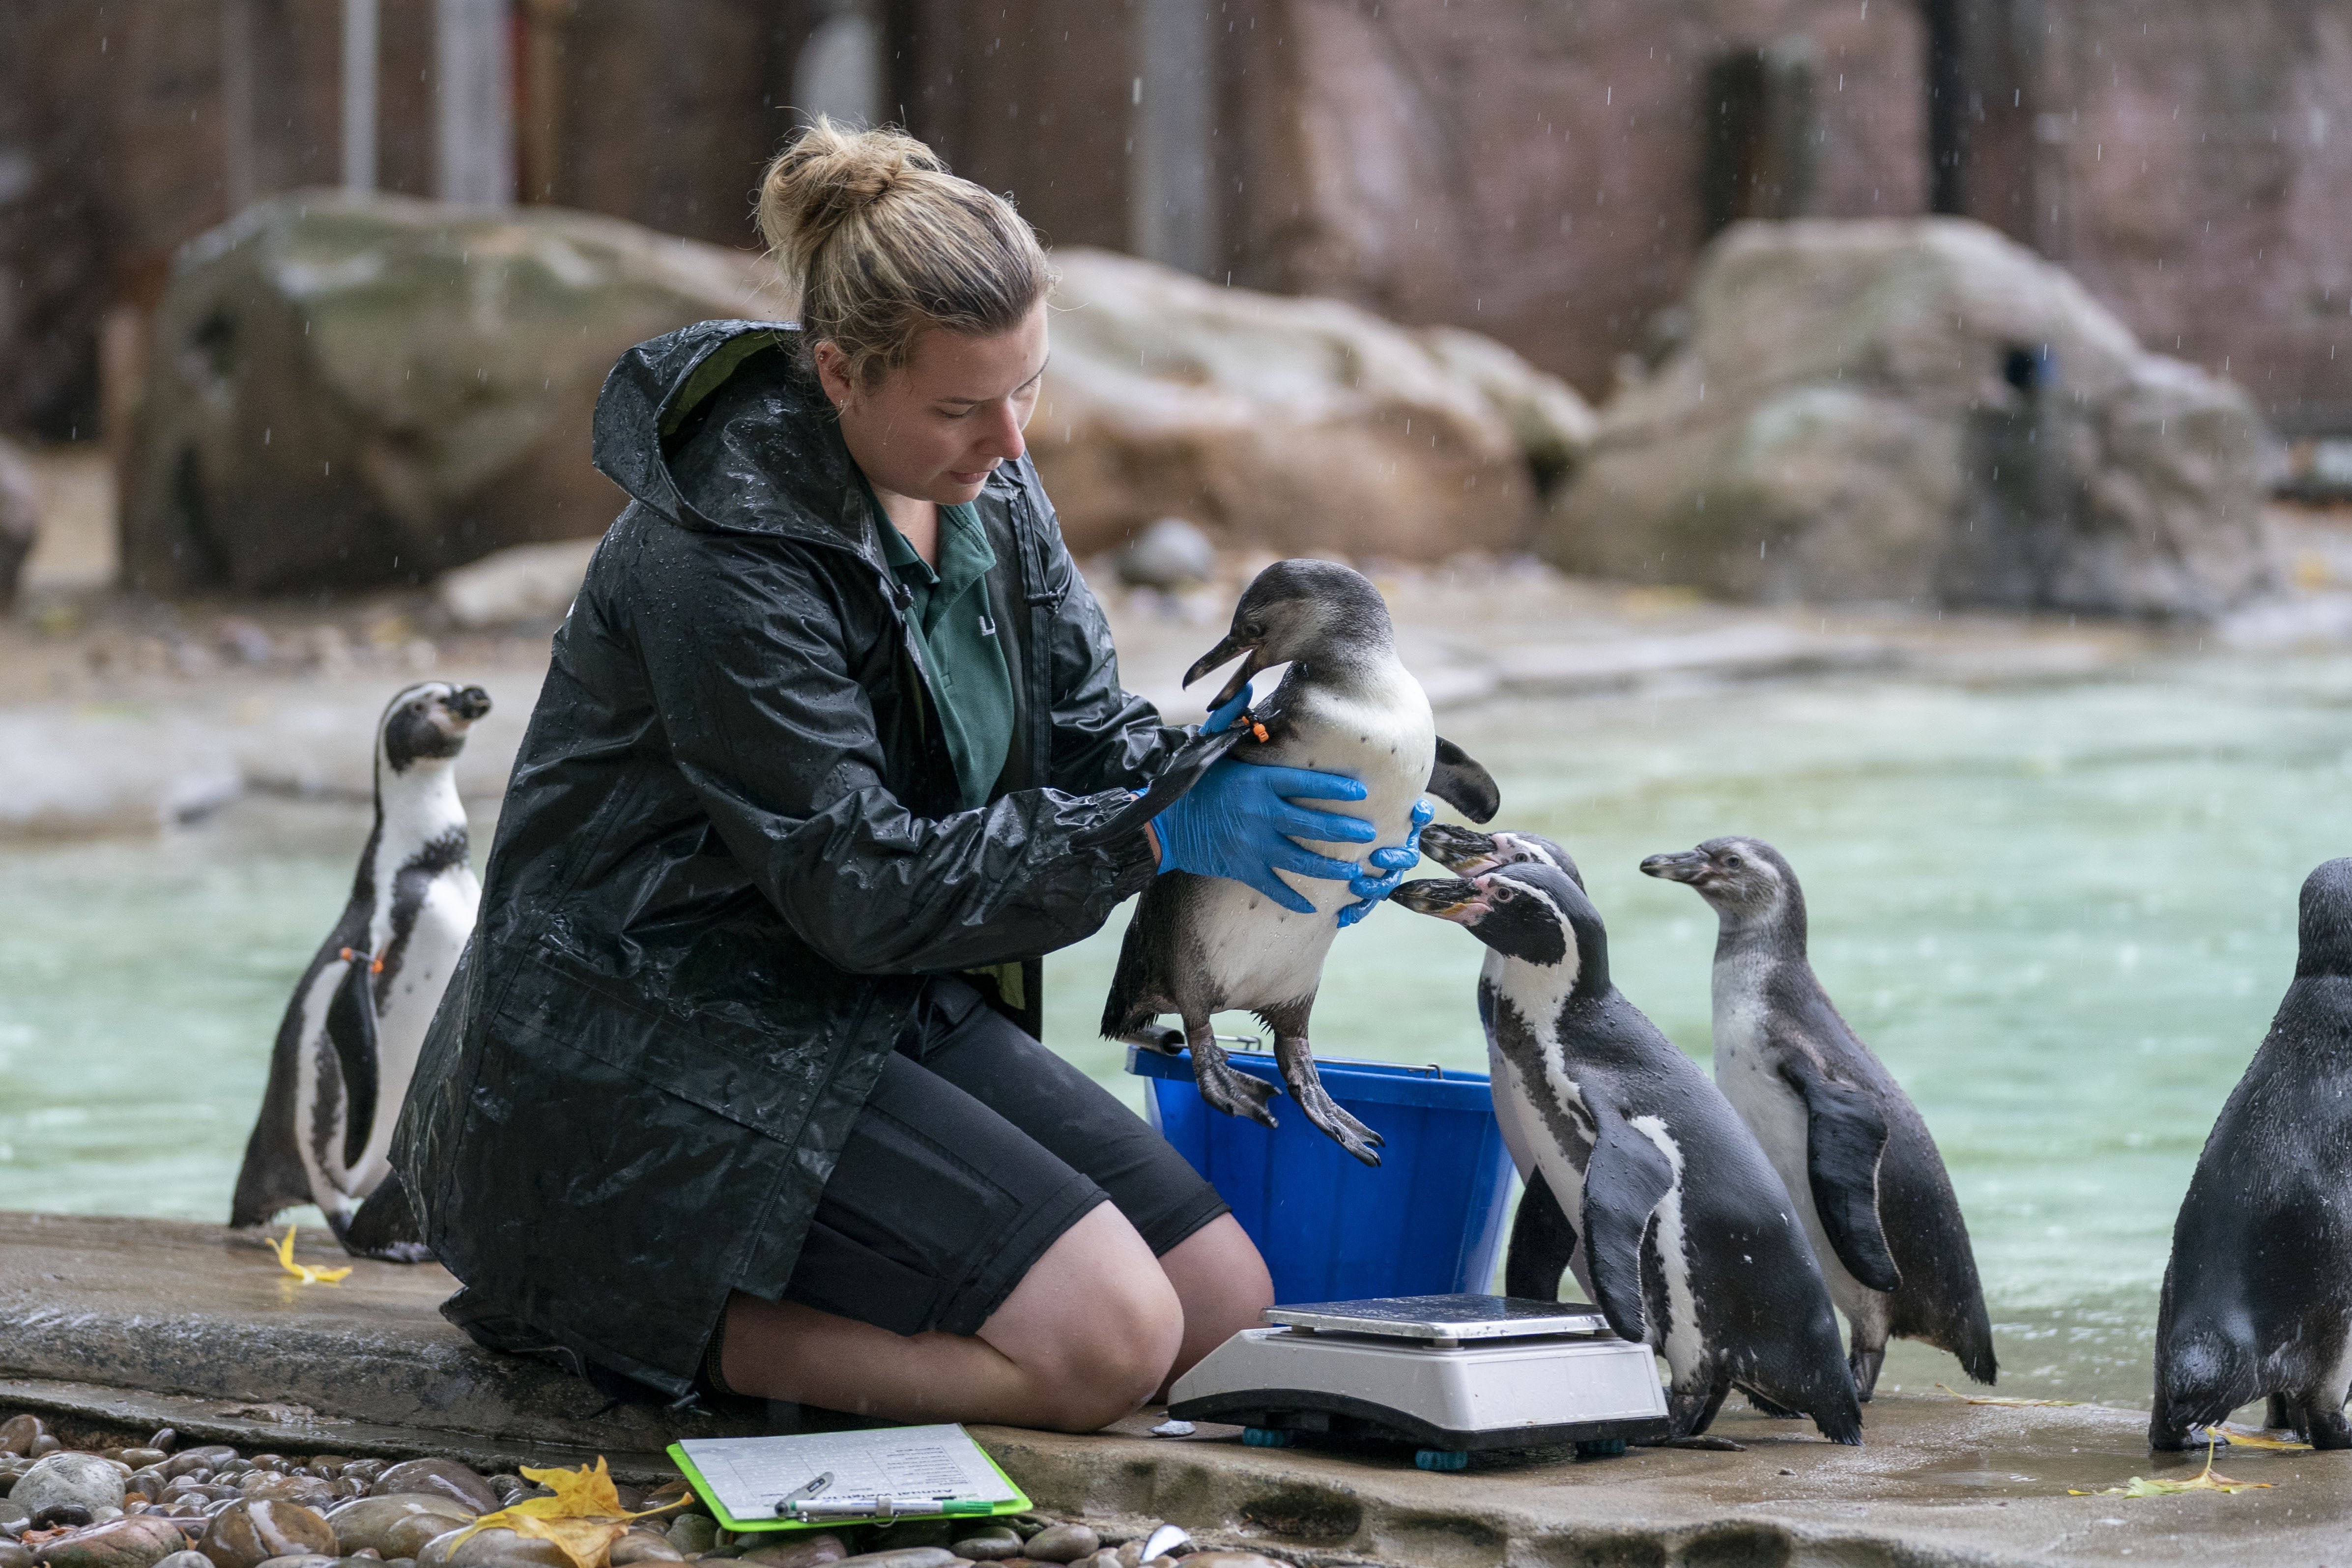 Humbolt penguins have their weight taken by zoo keeper Jess Jones during the annual weigh-in at ZSL London Zoo